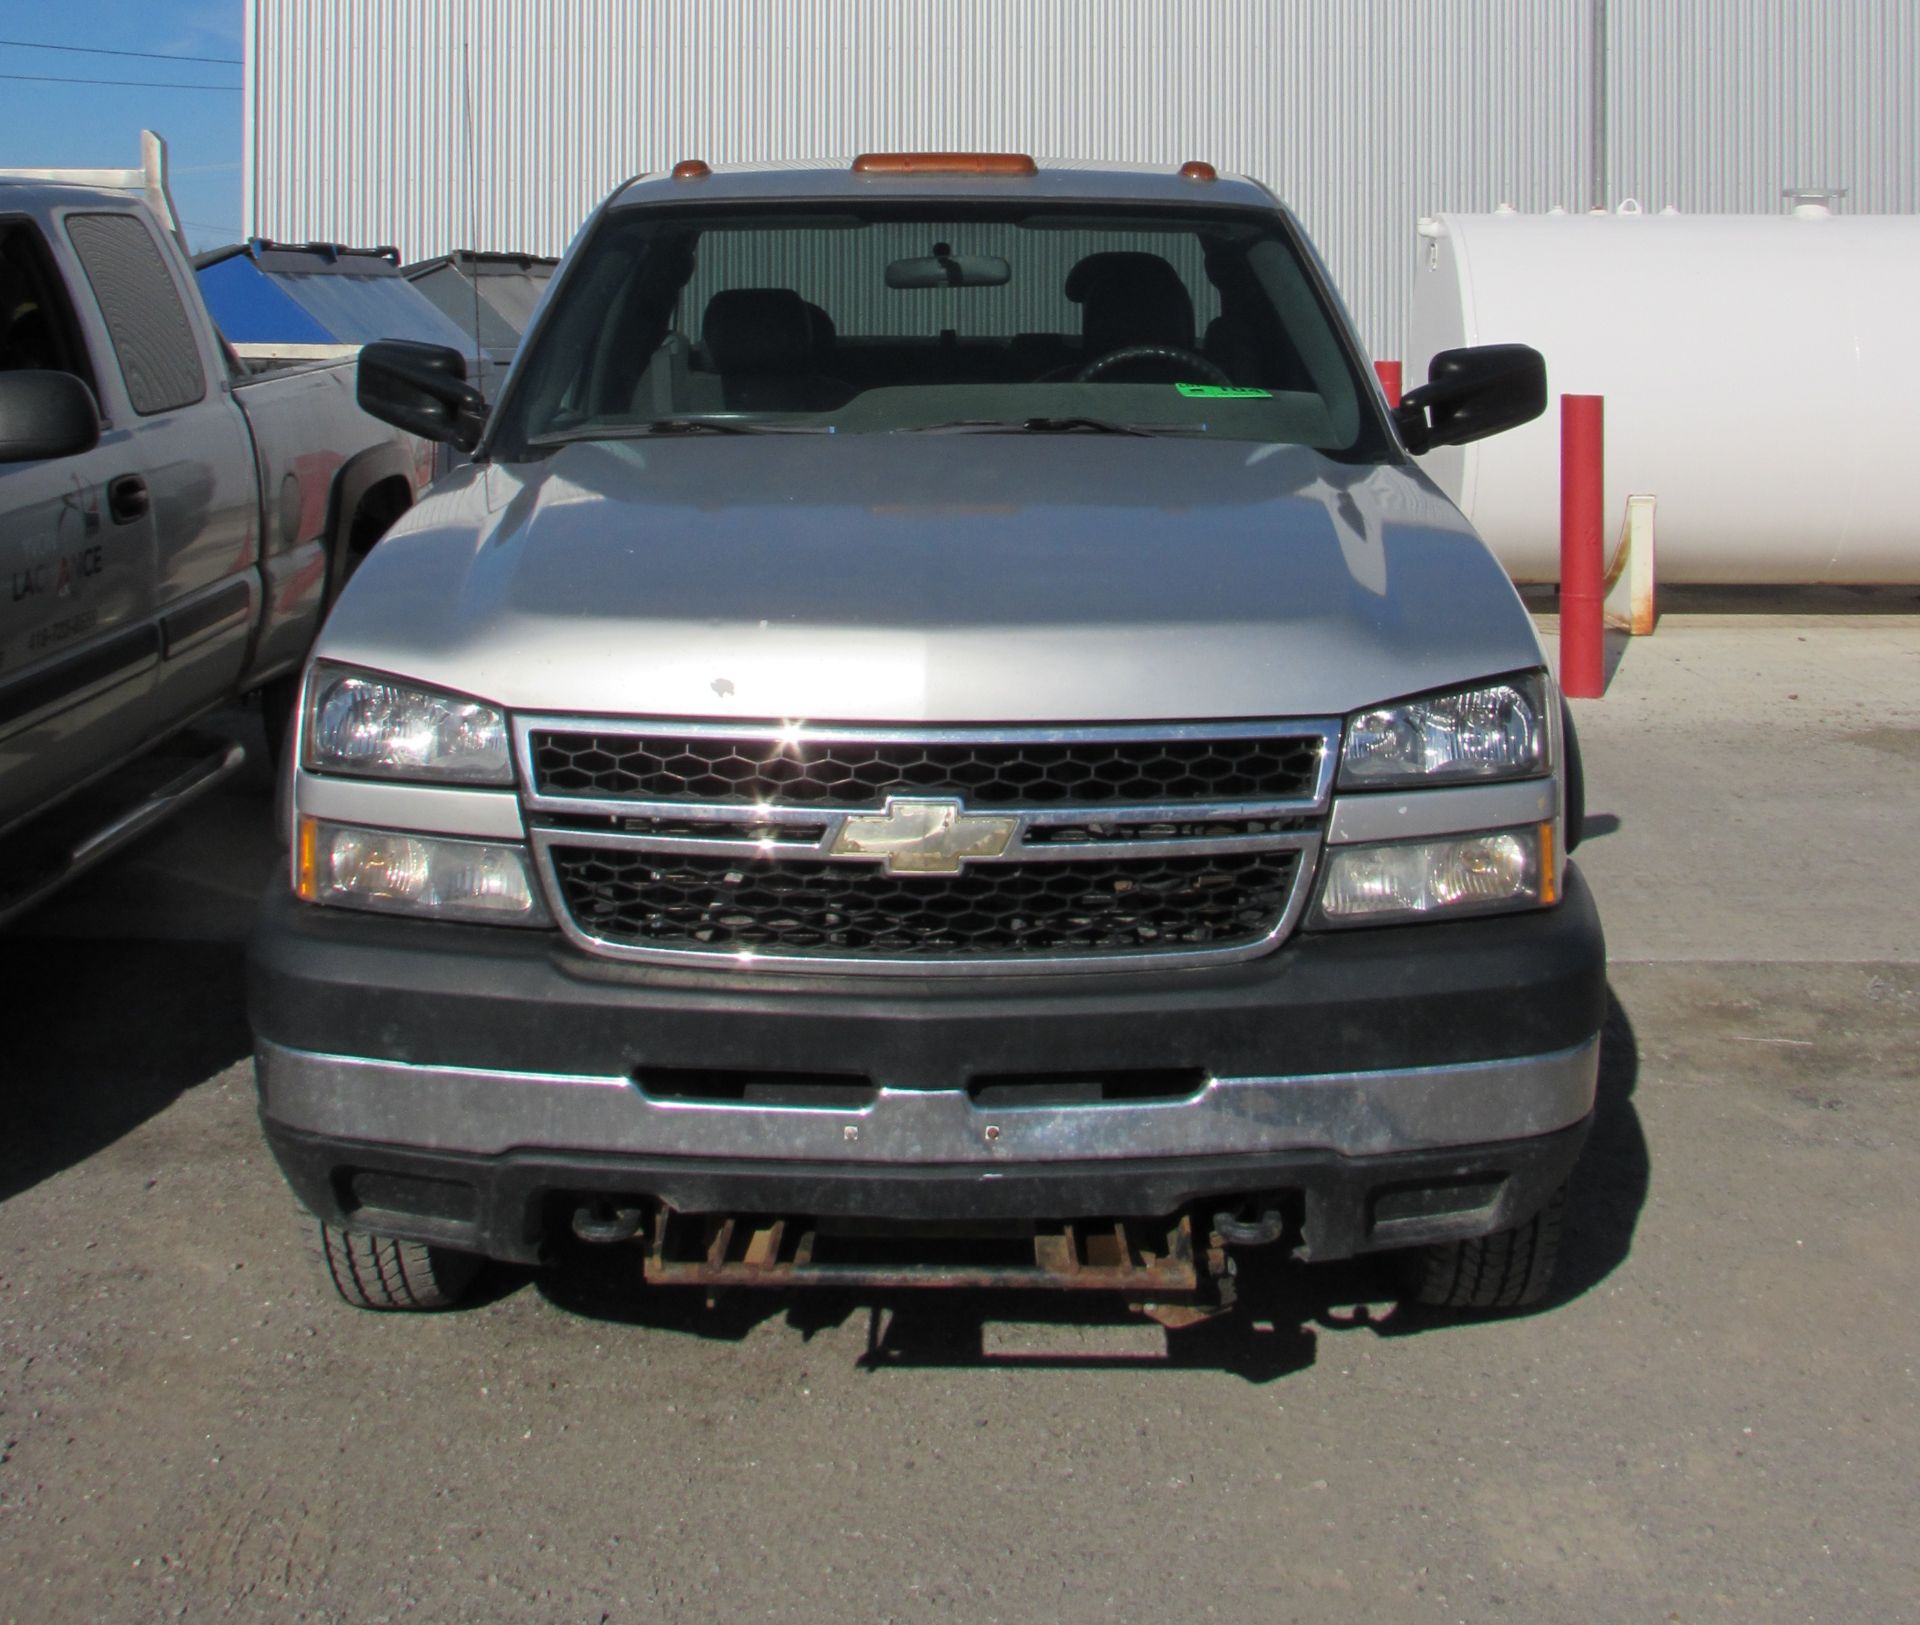 2007 CHEVY SILVERADO 2500HD PICK UP C/W EXTENDED CAB, 4X4, APPROX. 197,000KM (SHOWING ON METER) - Image 2 of 6